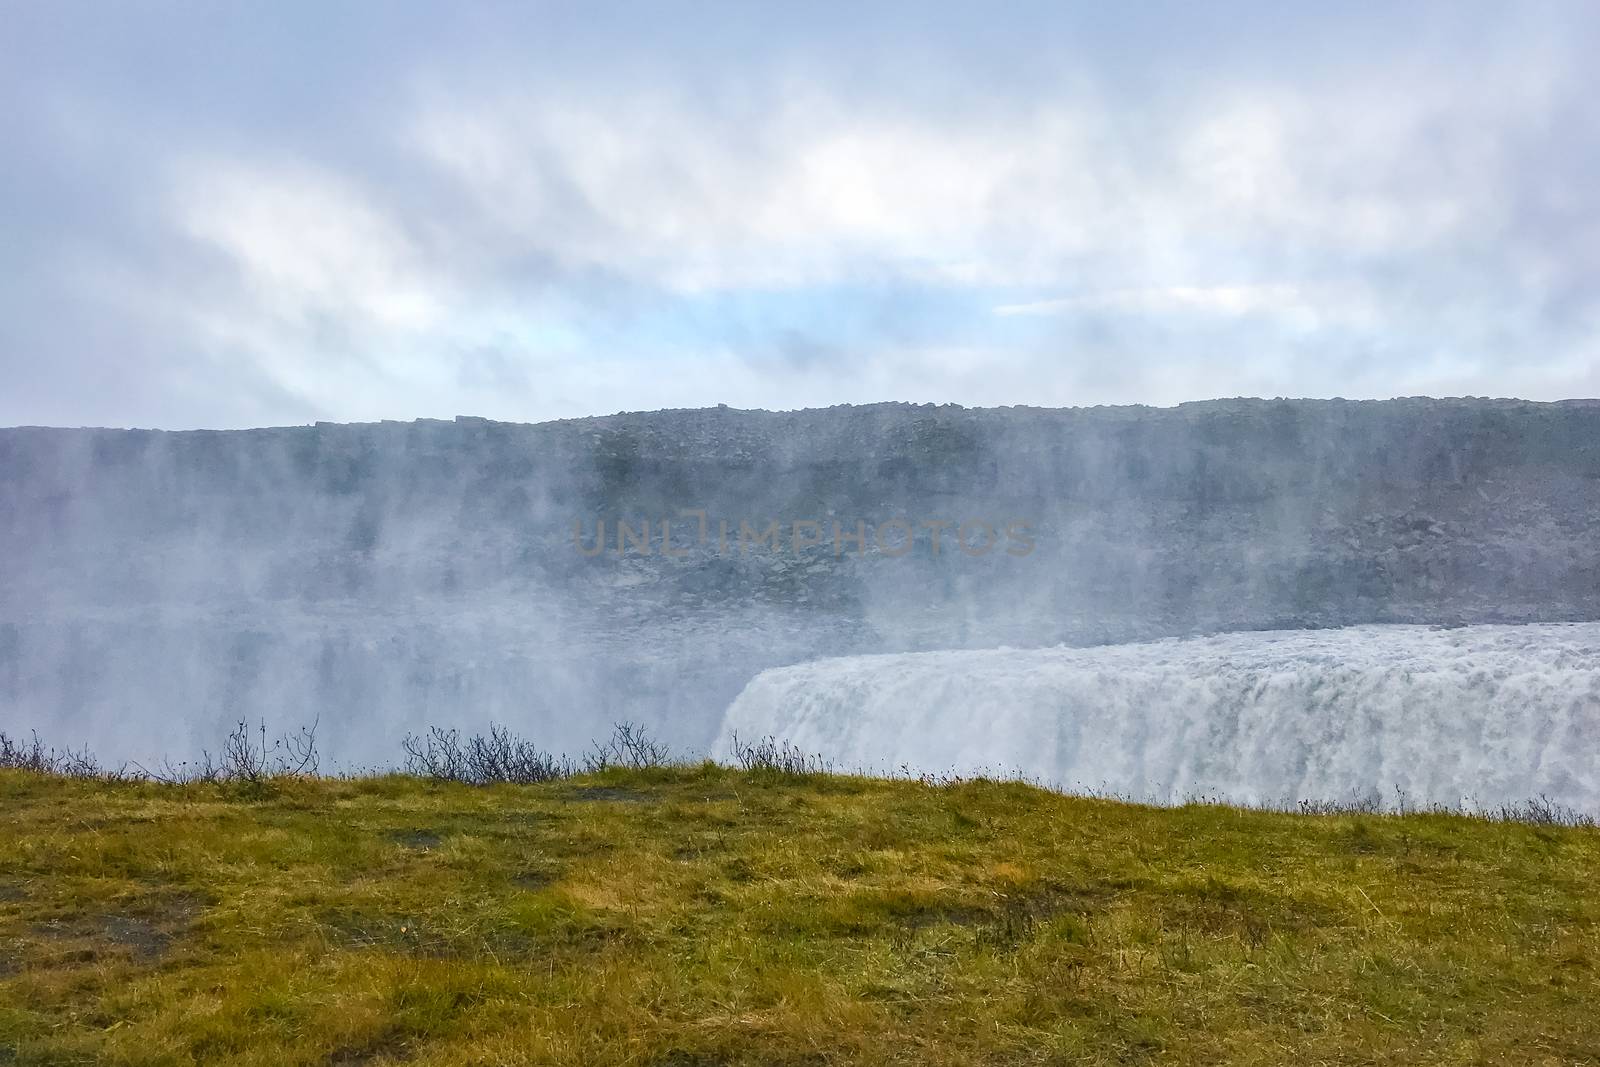 Dettifoss waterfall in Iceland creating big clouds of spray during cloudy day